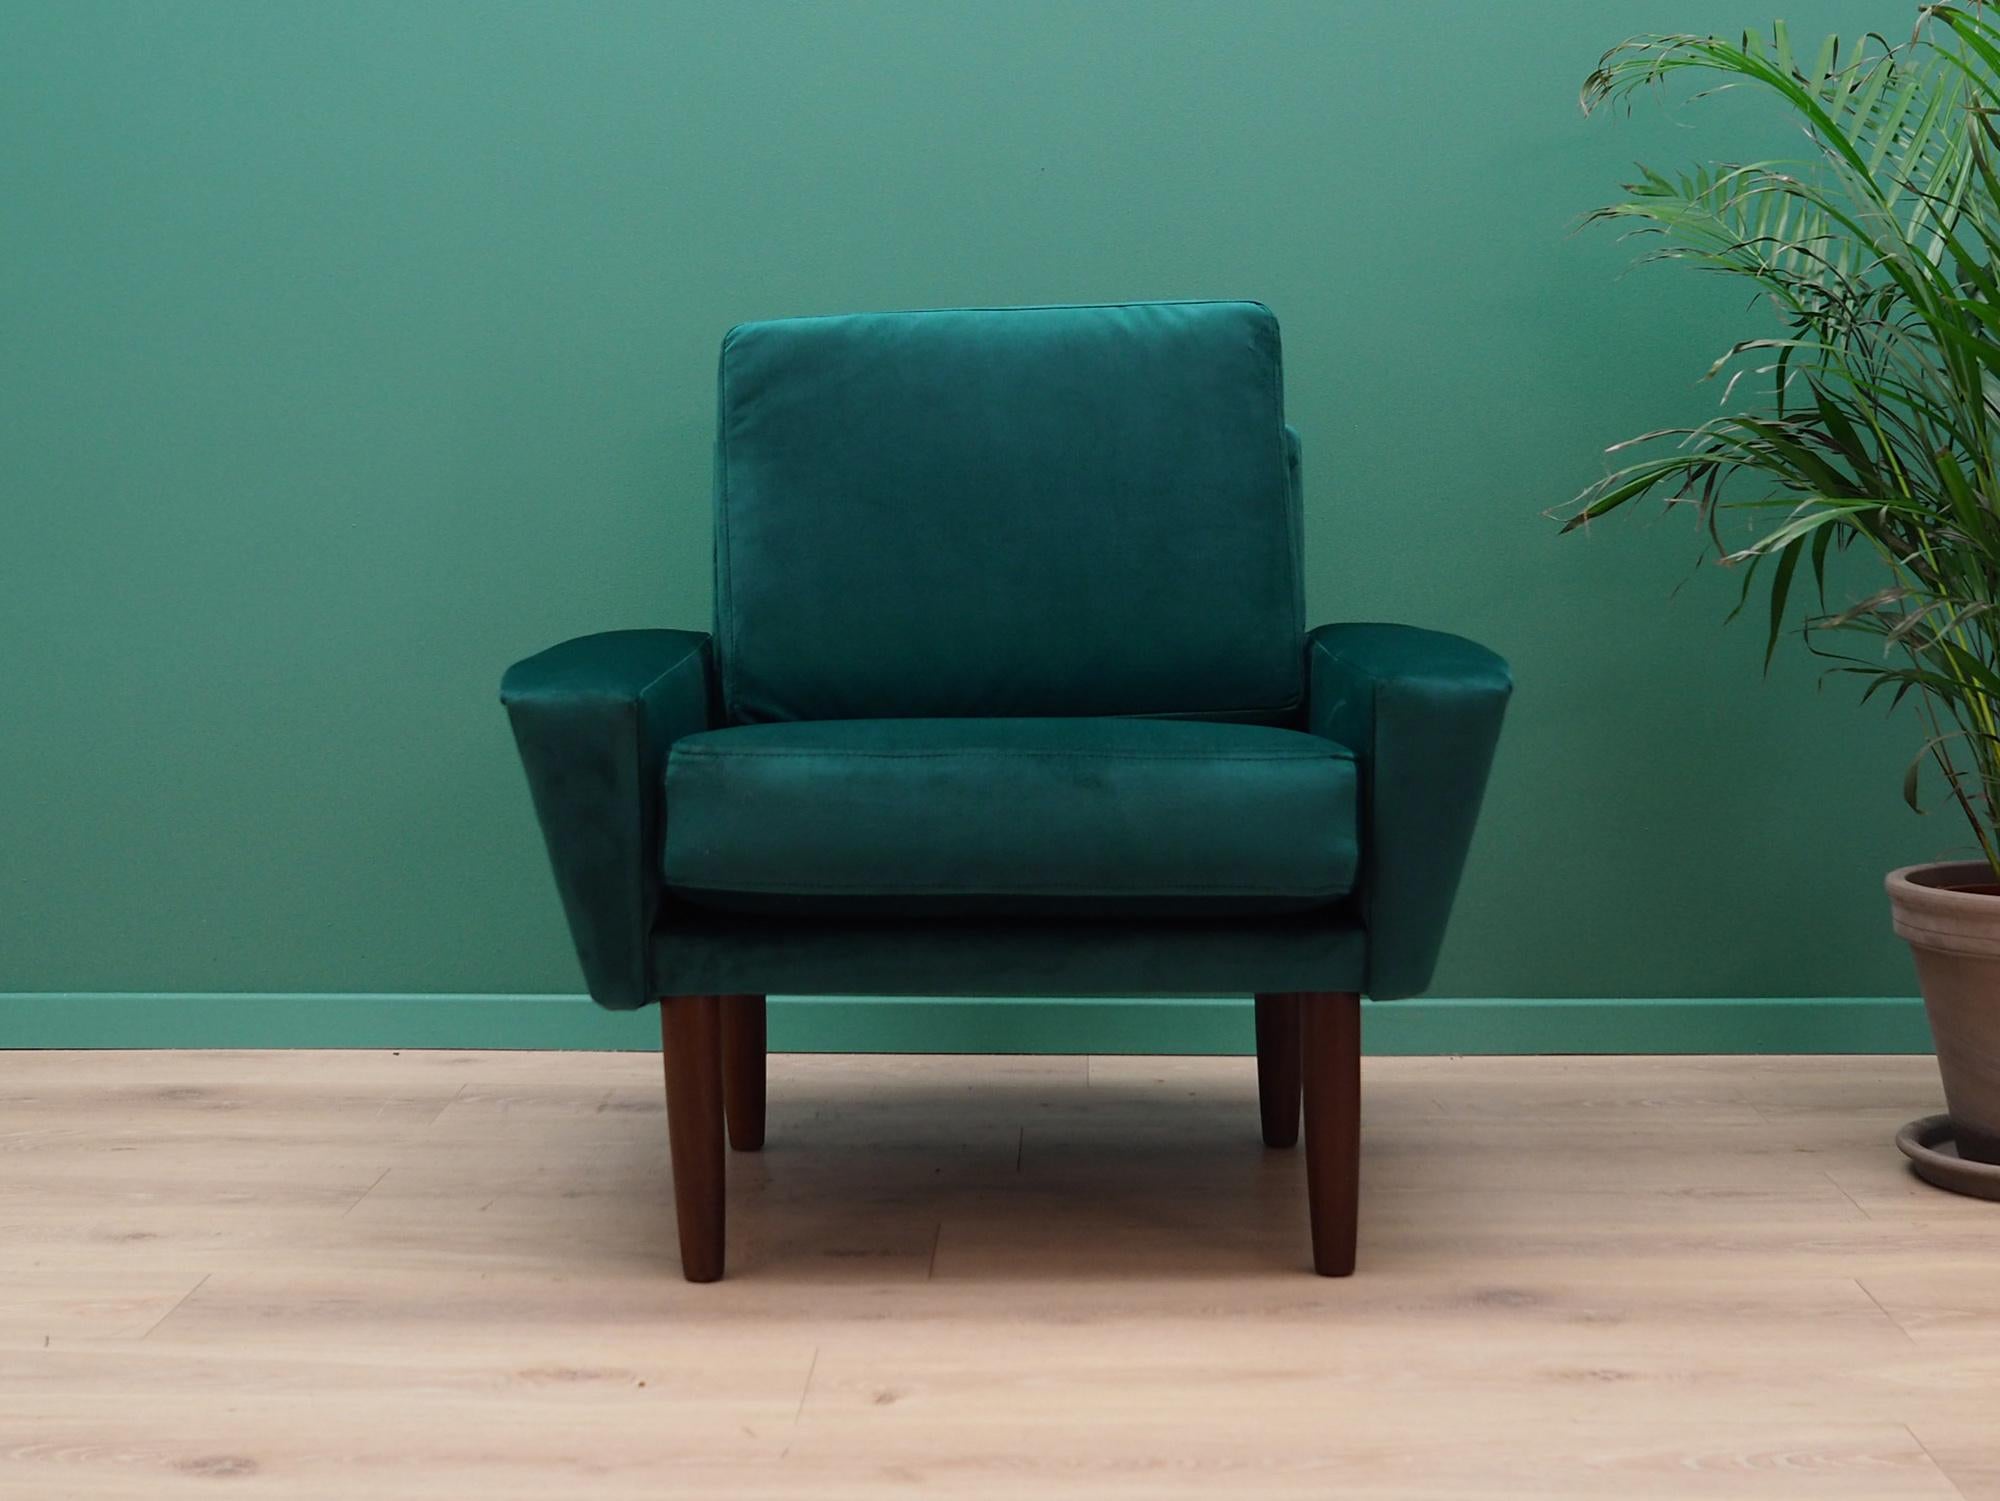 Fantastic armchair from the 1960s-1970s. Scandinavian design, Minimalist form. New upholstery made of velour in green. Preserved in good condition (minor bruises and scratches) - directly for use.

Dimensions: Height 76 cm, width 82 cm, depth 72